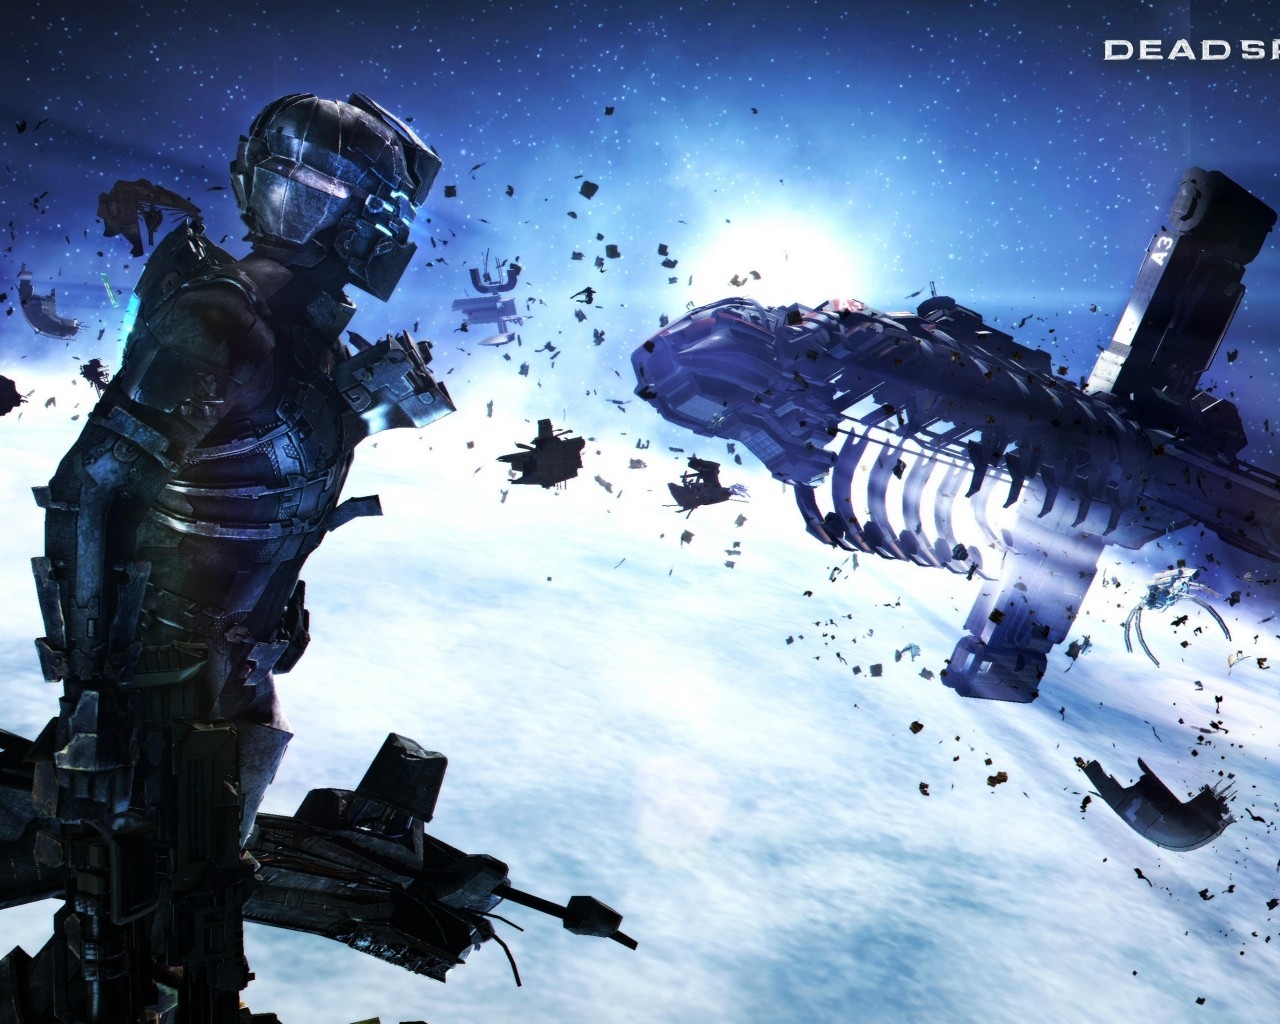 Dead Space 3 Poster for 1280 x 1024 resolution